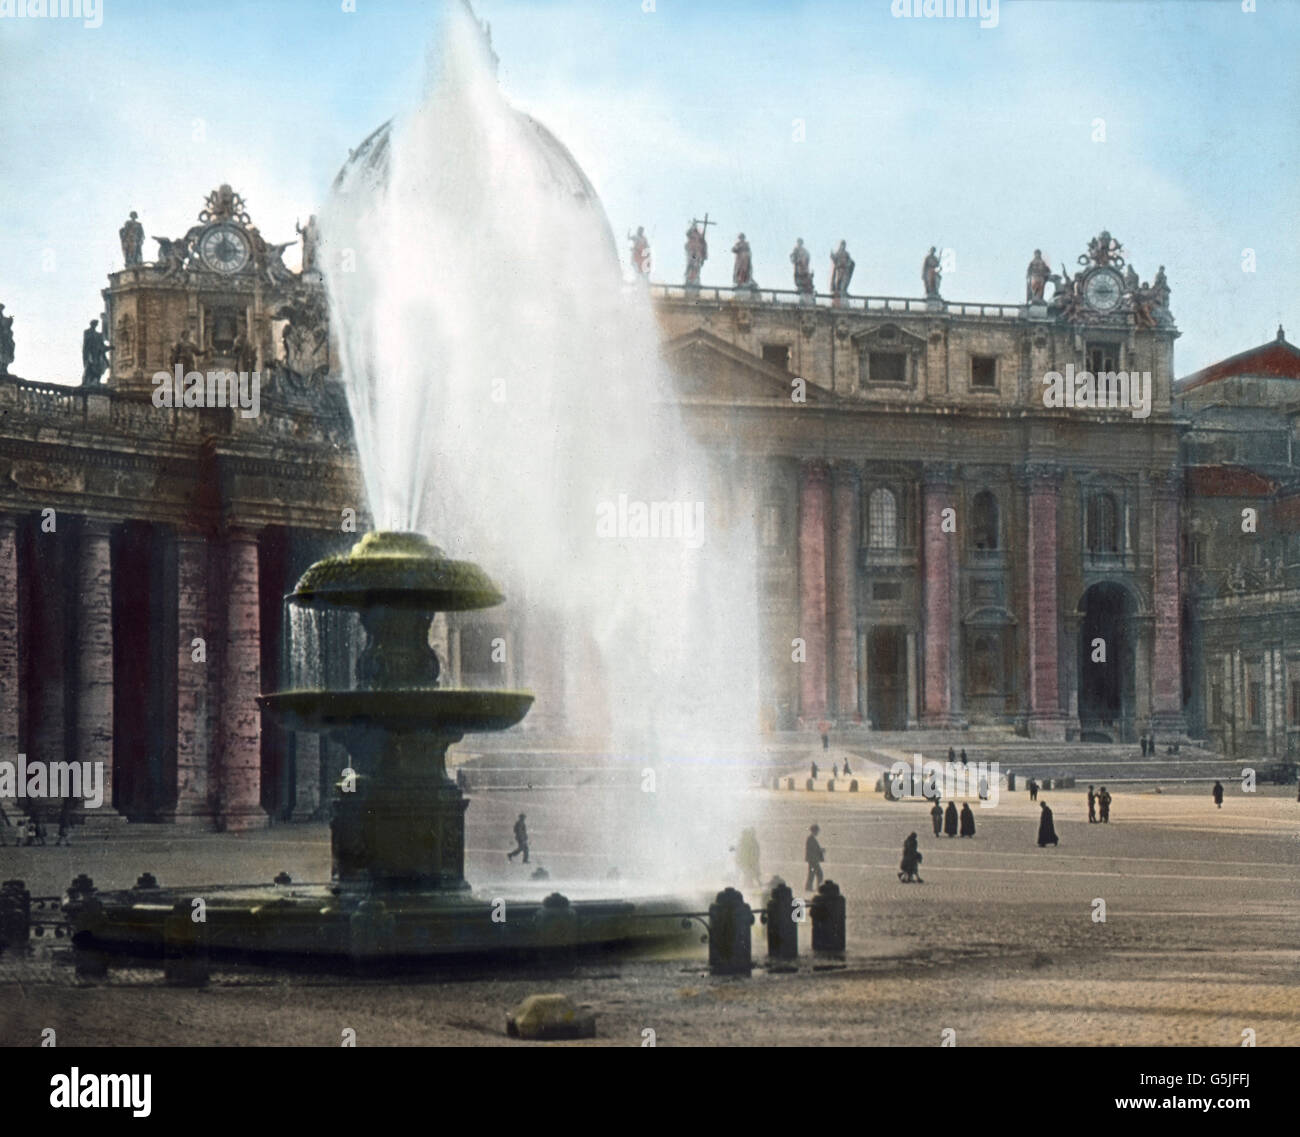 Springbrunnen auf dem Petersplatz vor dem Petersdom in Rom, Italien 1920er Jahre. Fountain on St. Peter's square in front of St. Peter's cathedral at Rome, Italy 1920s. Stock Photo